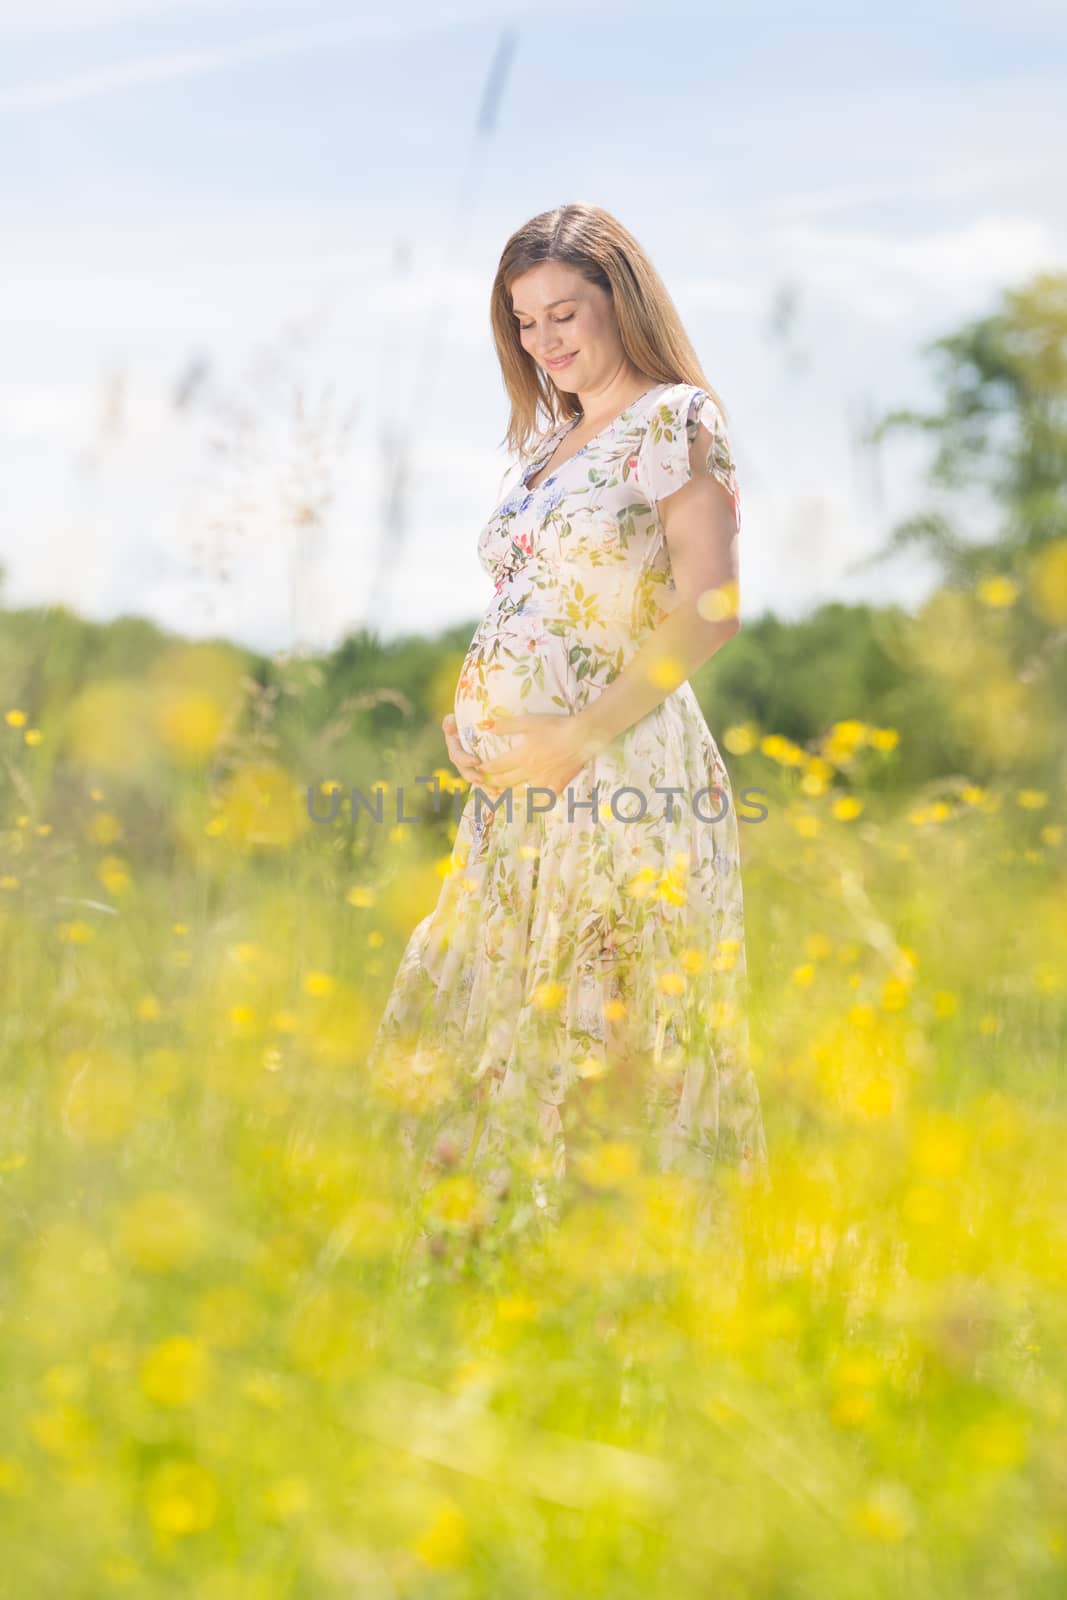 Portrait of beautiful happy pregnant woman smiling in white summer dress relaxing in meadow full of yellow blooming flowers. Concept of healthy maternity care.